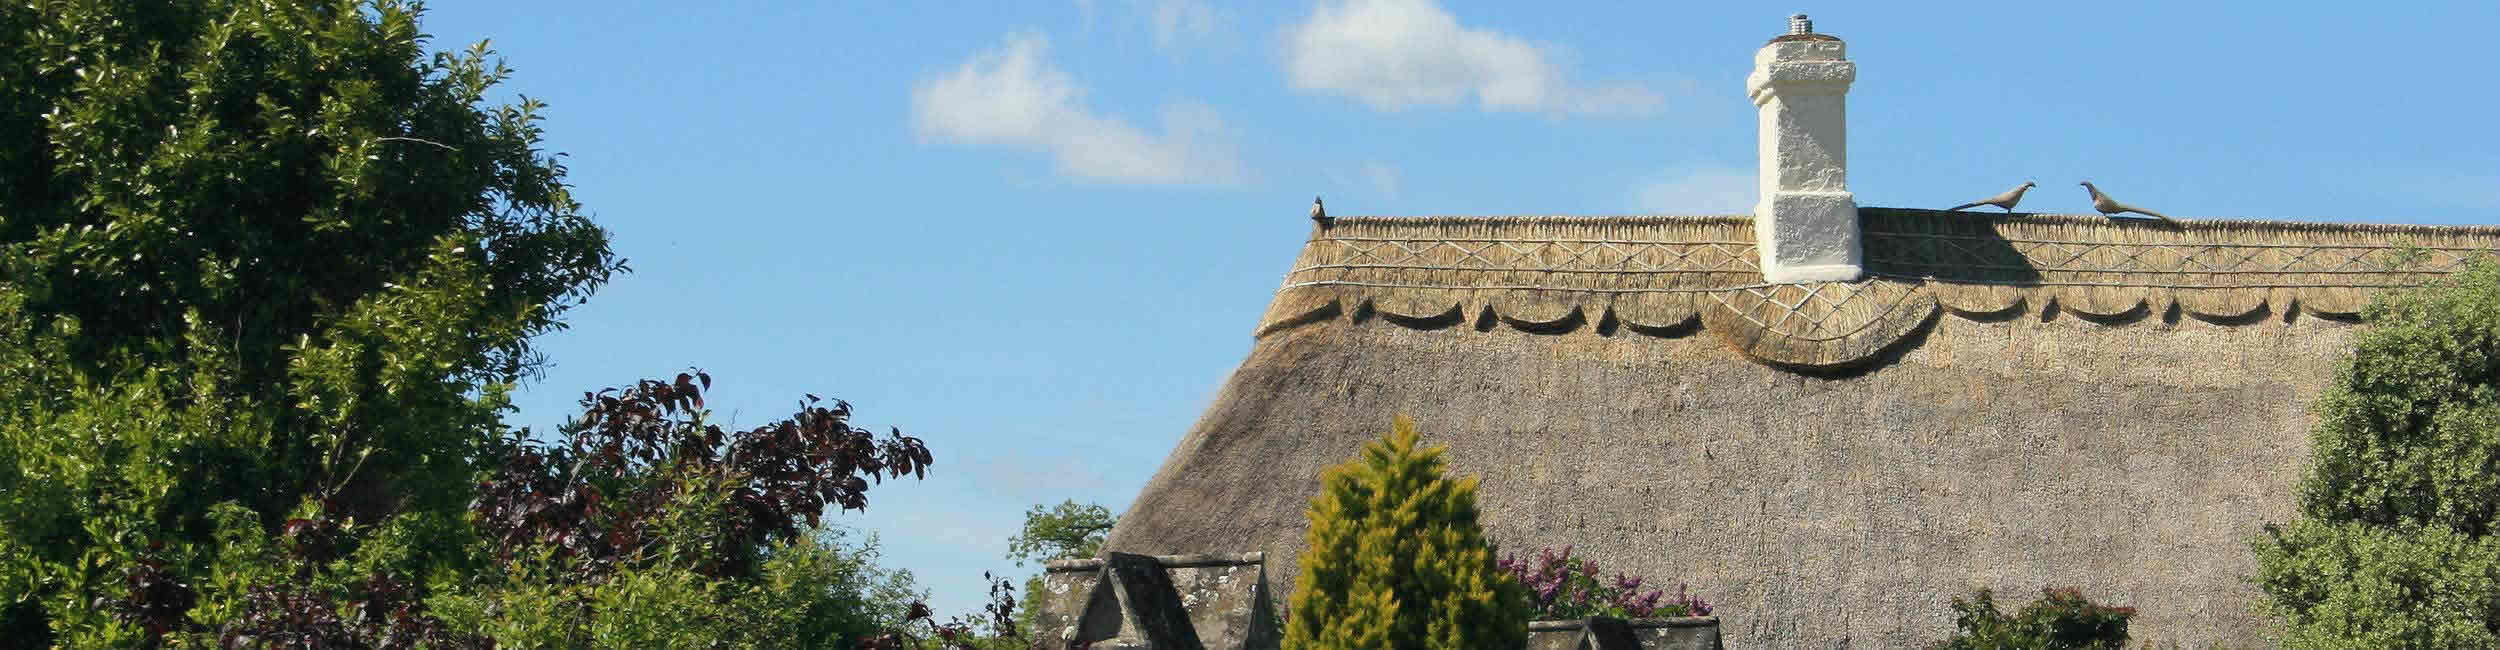 Devon Rose Lettings and Property Management - thatched roof